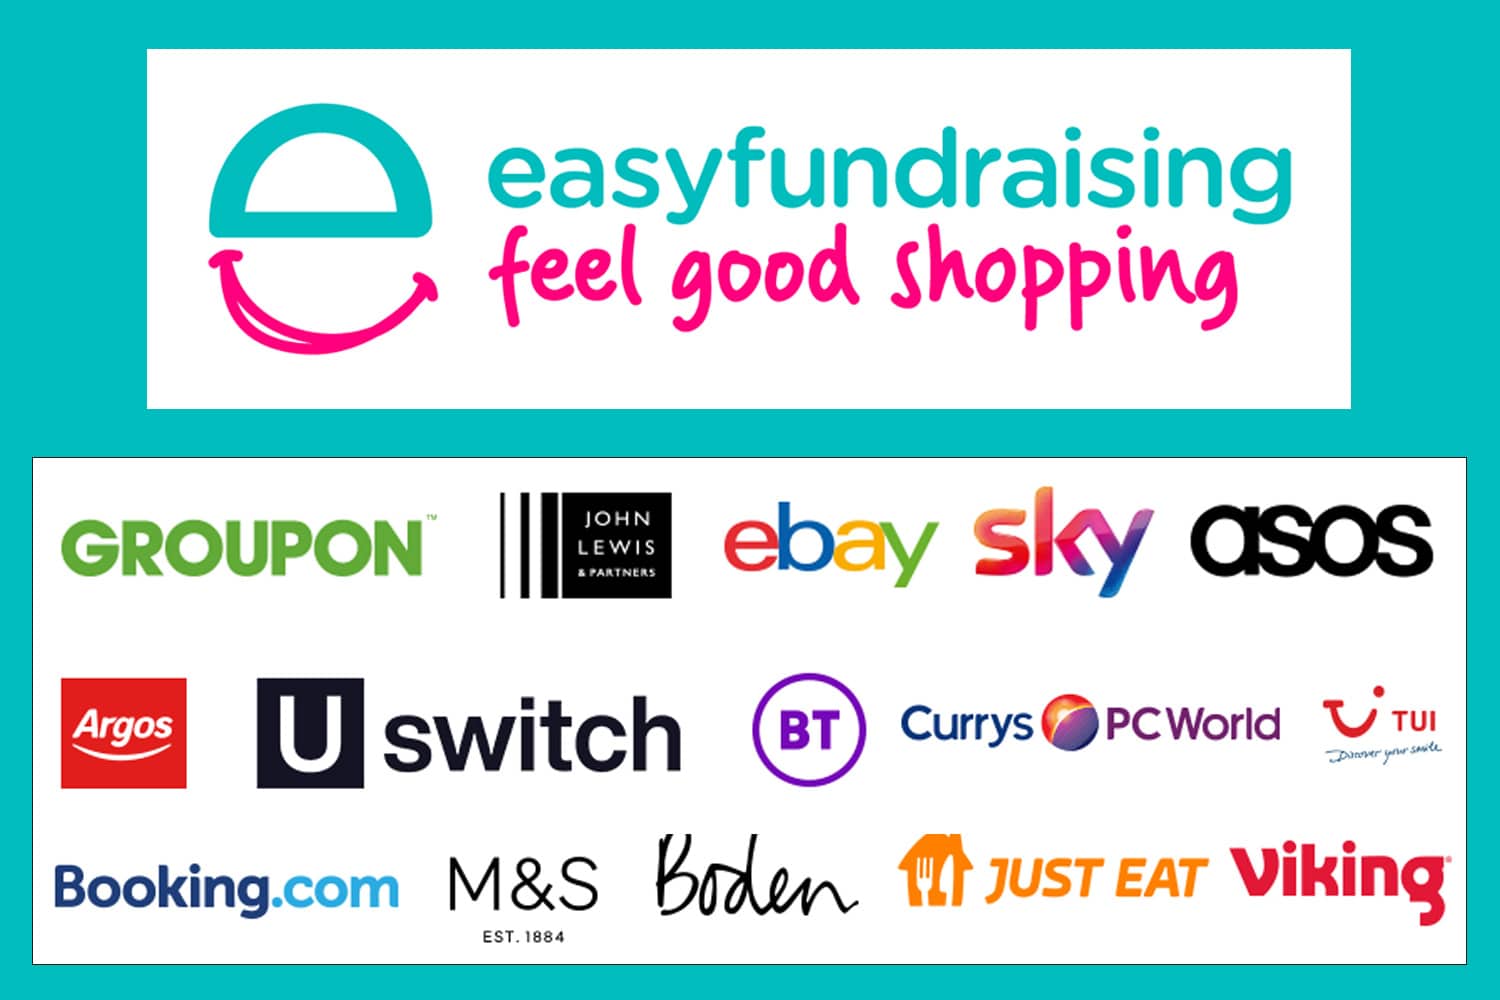 Support Focus4Hope whilst you shop